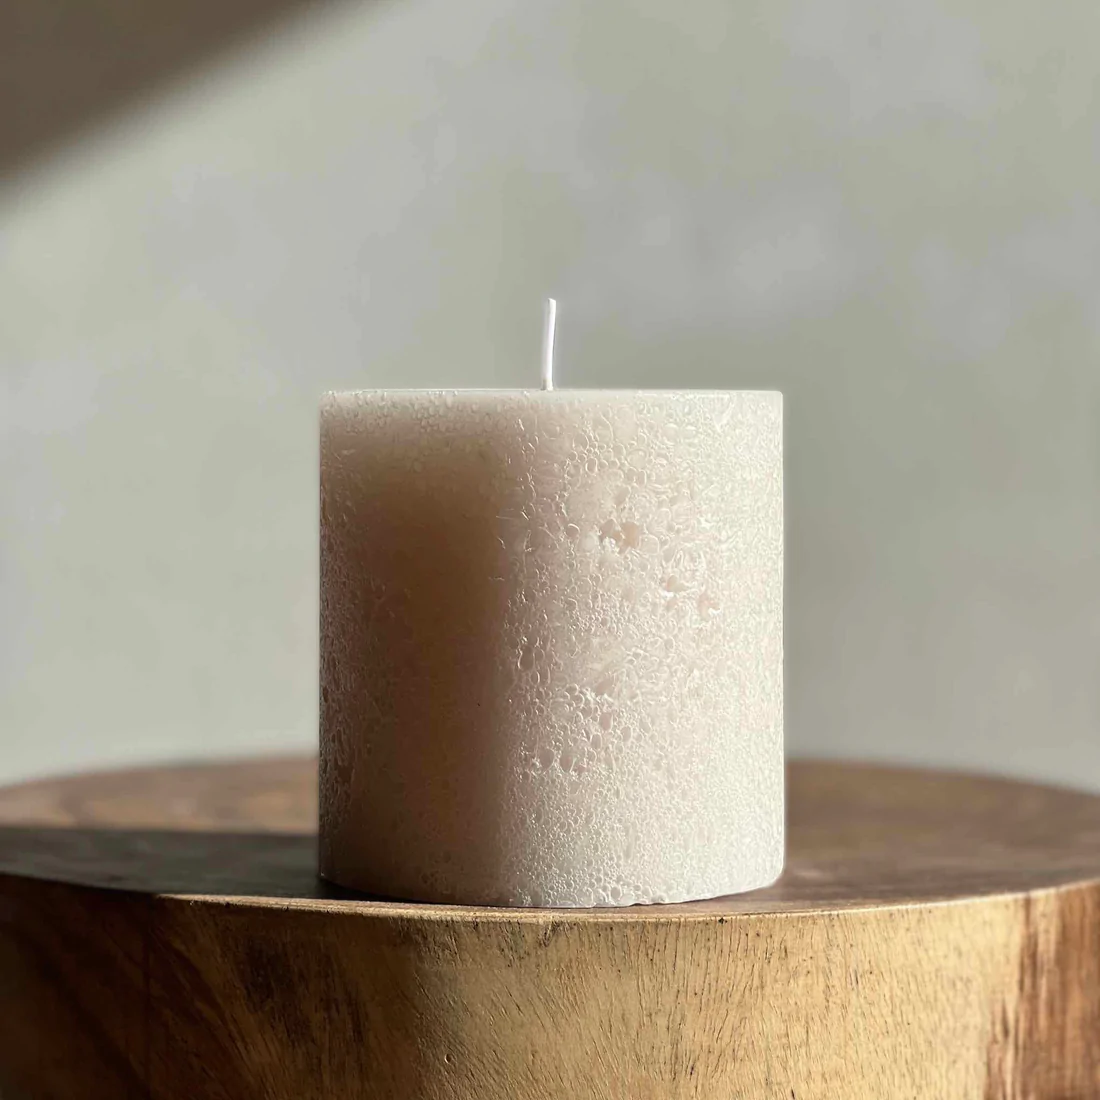 Candle Kiosk - Textured Sandstone Pillar Candles - small candle on wood block - Stocked at LOVINLIFE Co Byron Bay for all your gifts, candles and interior decorating needs